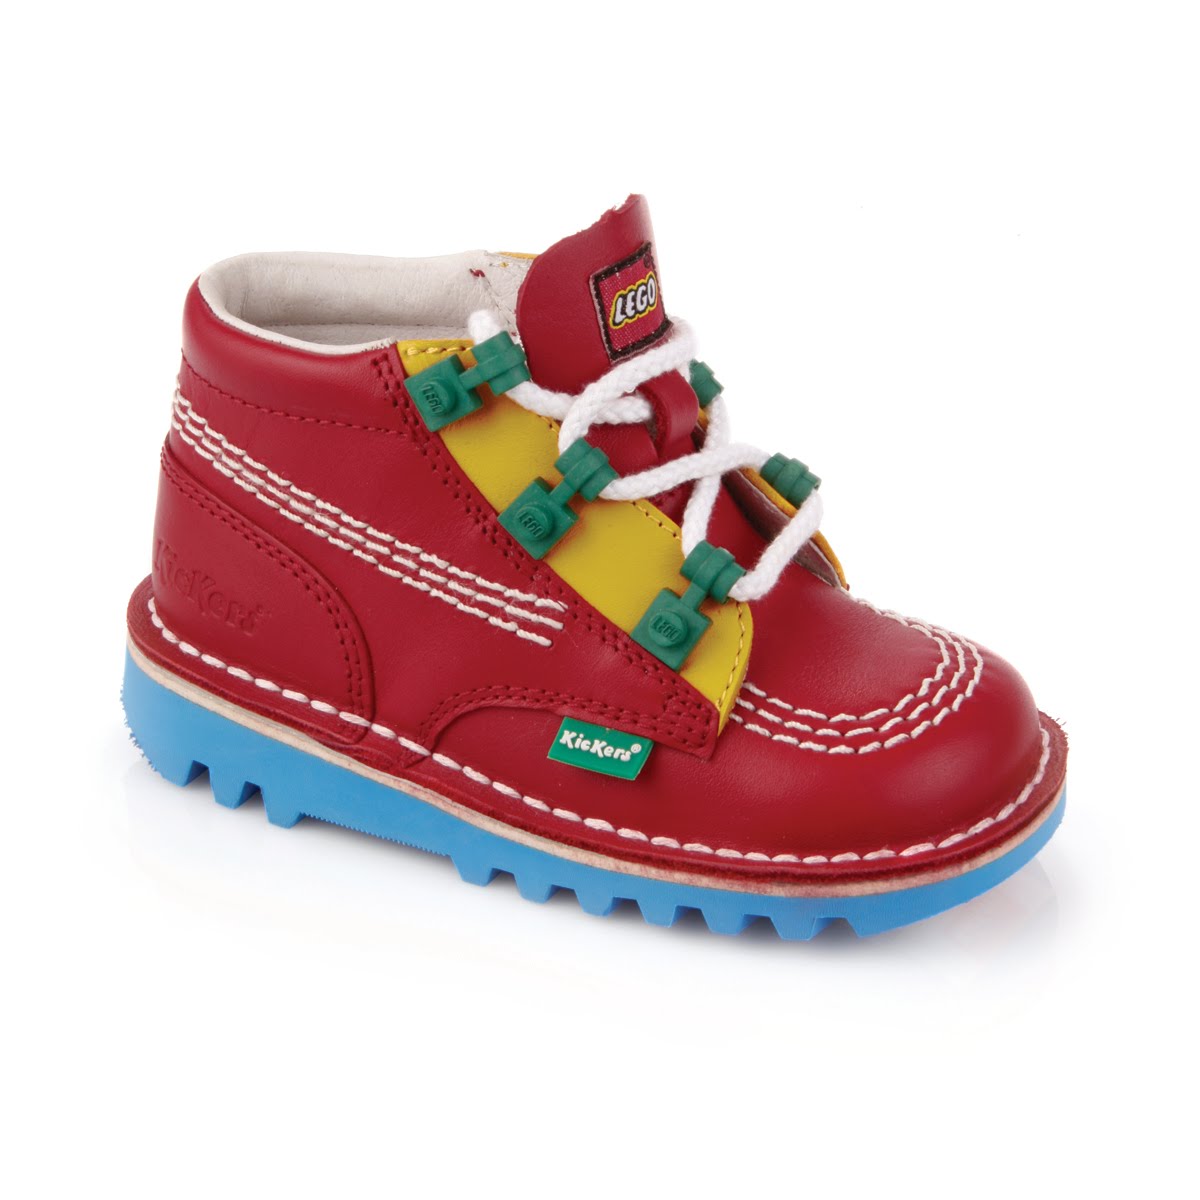 Madhouse Family Reviews: new Kickers Lego shoe collection